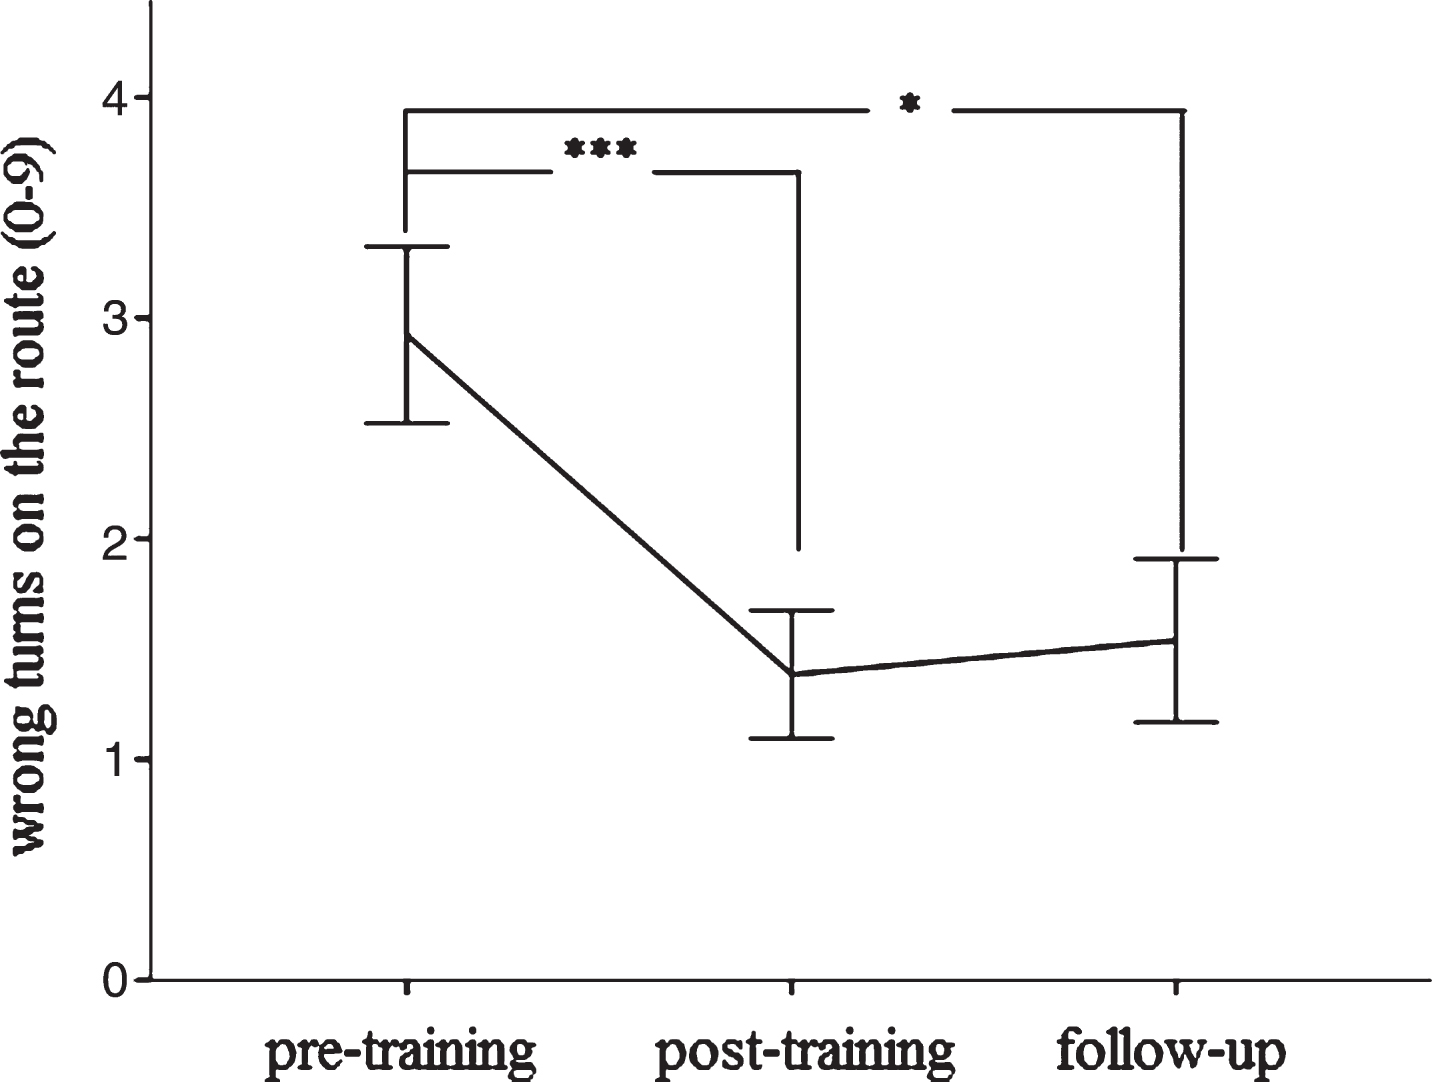 Change in spatial navigation (route learning task) between pre- to post-training and 6 months later. Significant at *p < 0.05 or ***p < 0.001, respectively. Error bars indicate±1 standard error of the mean.